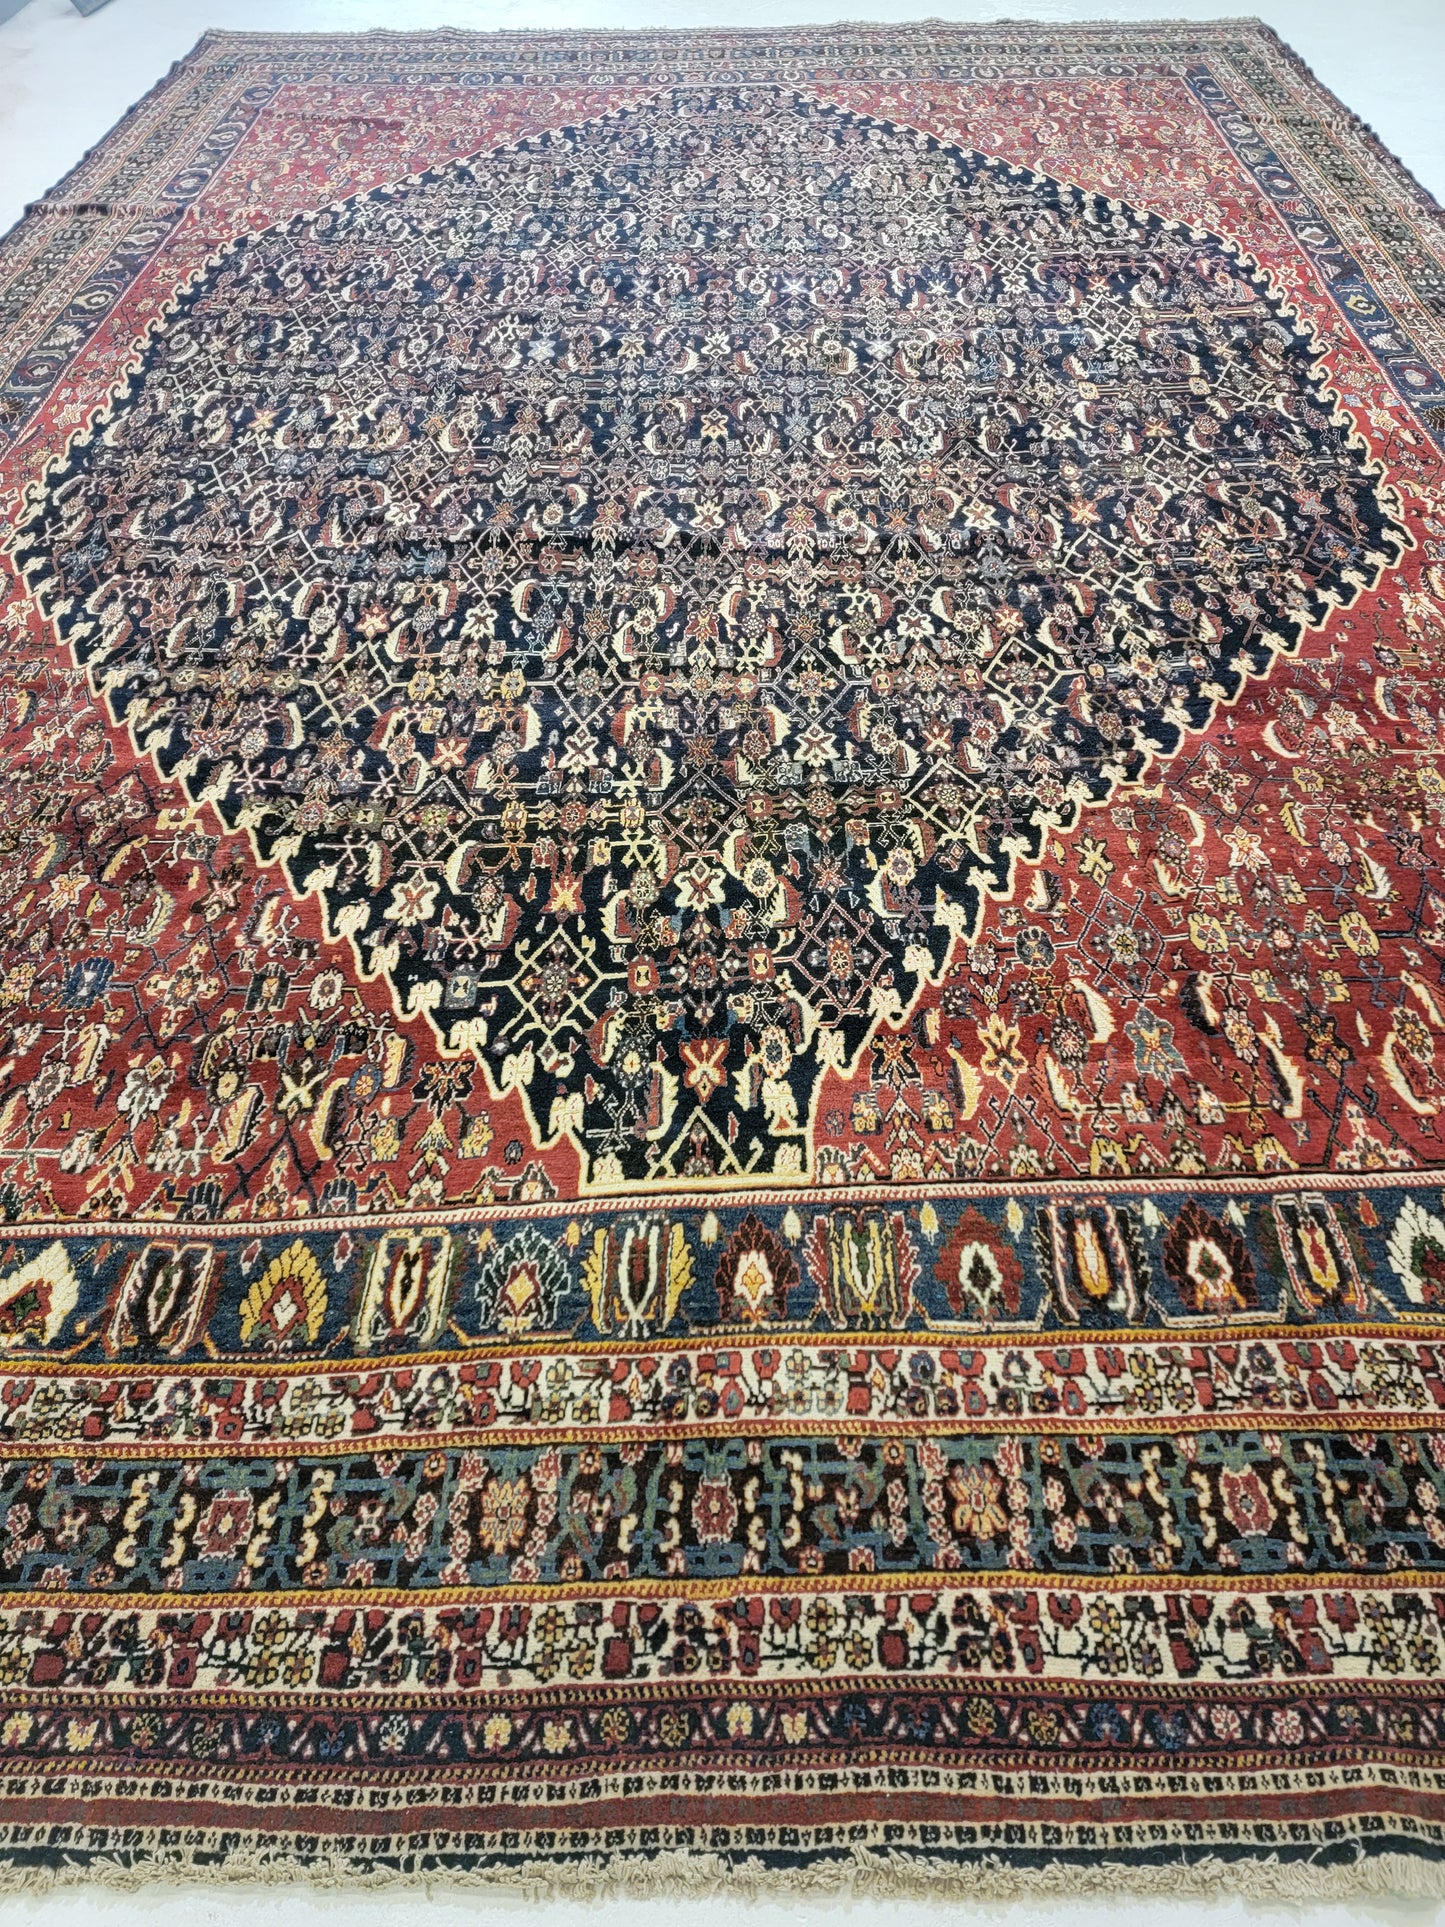 Antique Hand-Knotted Wool Area Rug Ghashghai Mahi Extremely Rare 11'7" x 17'